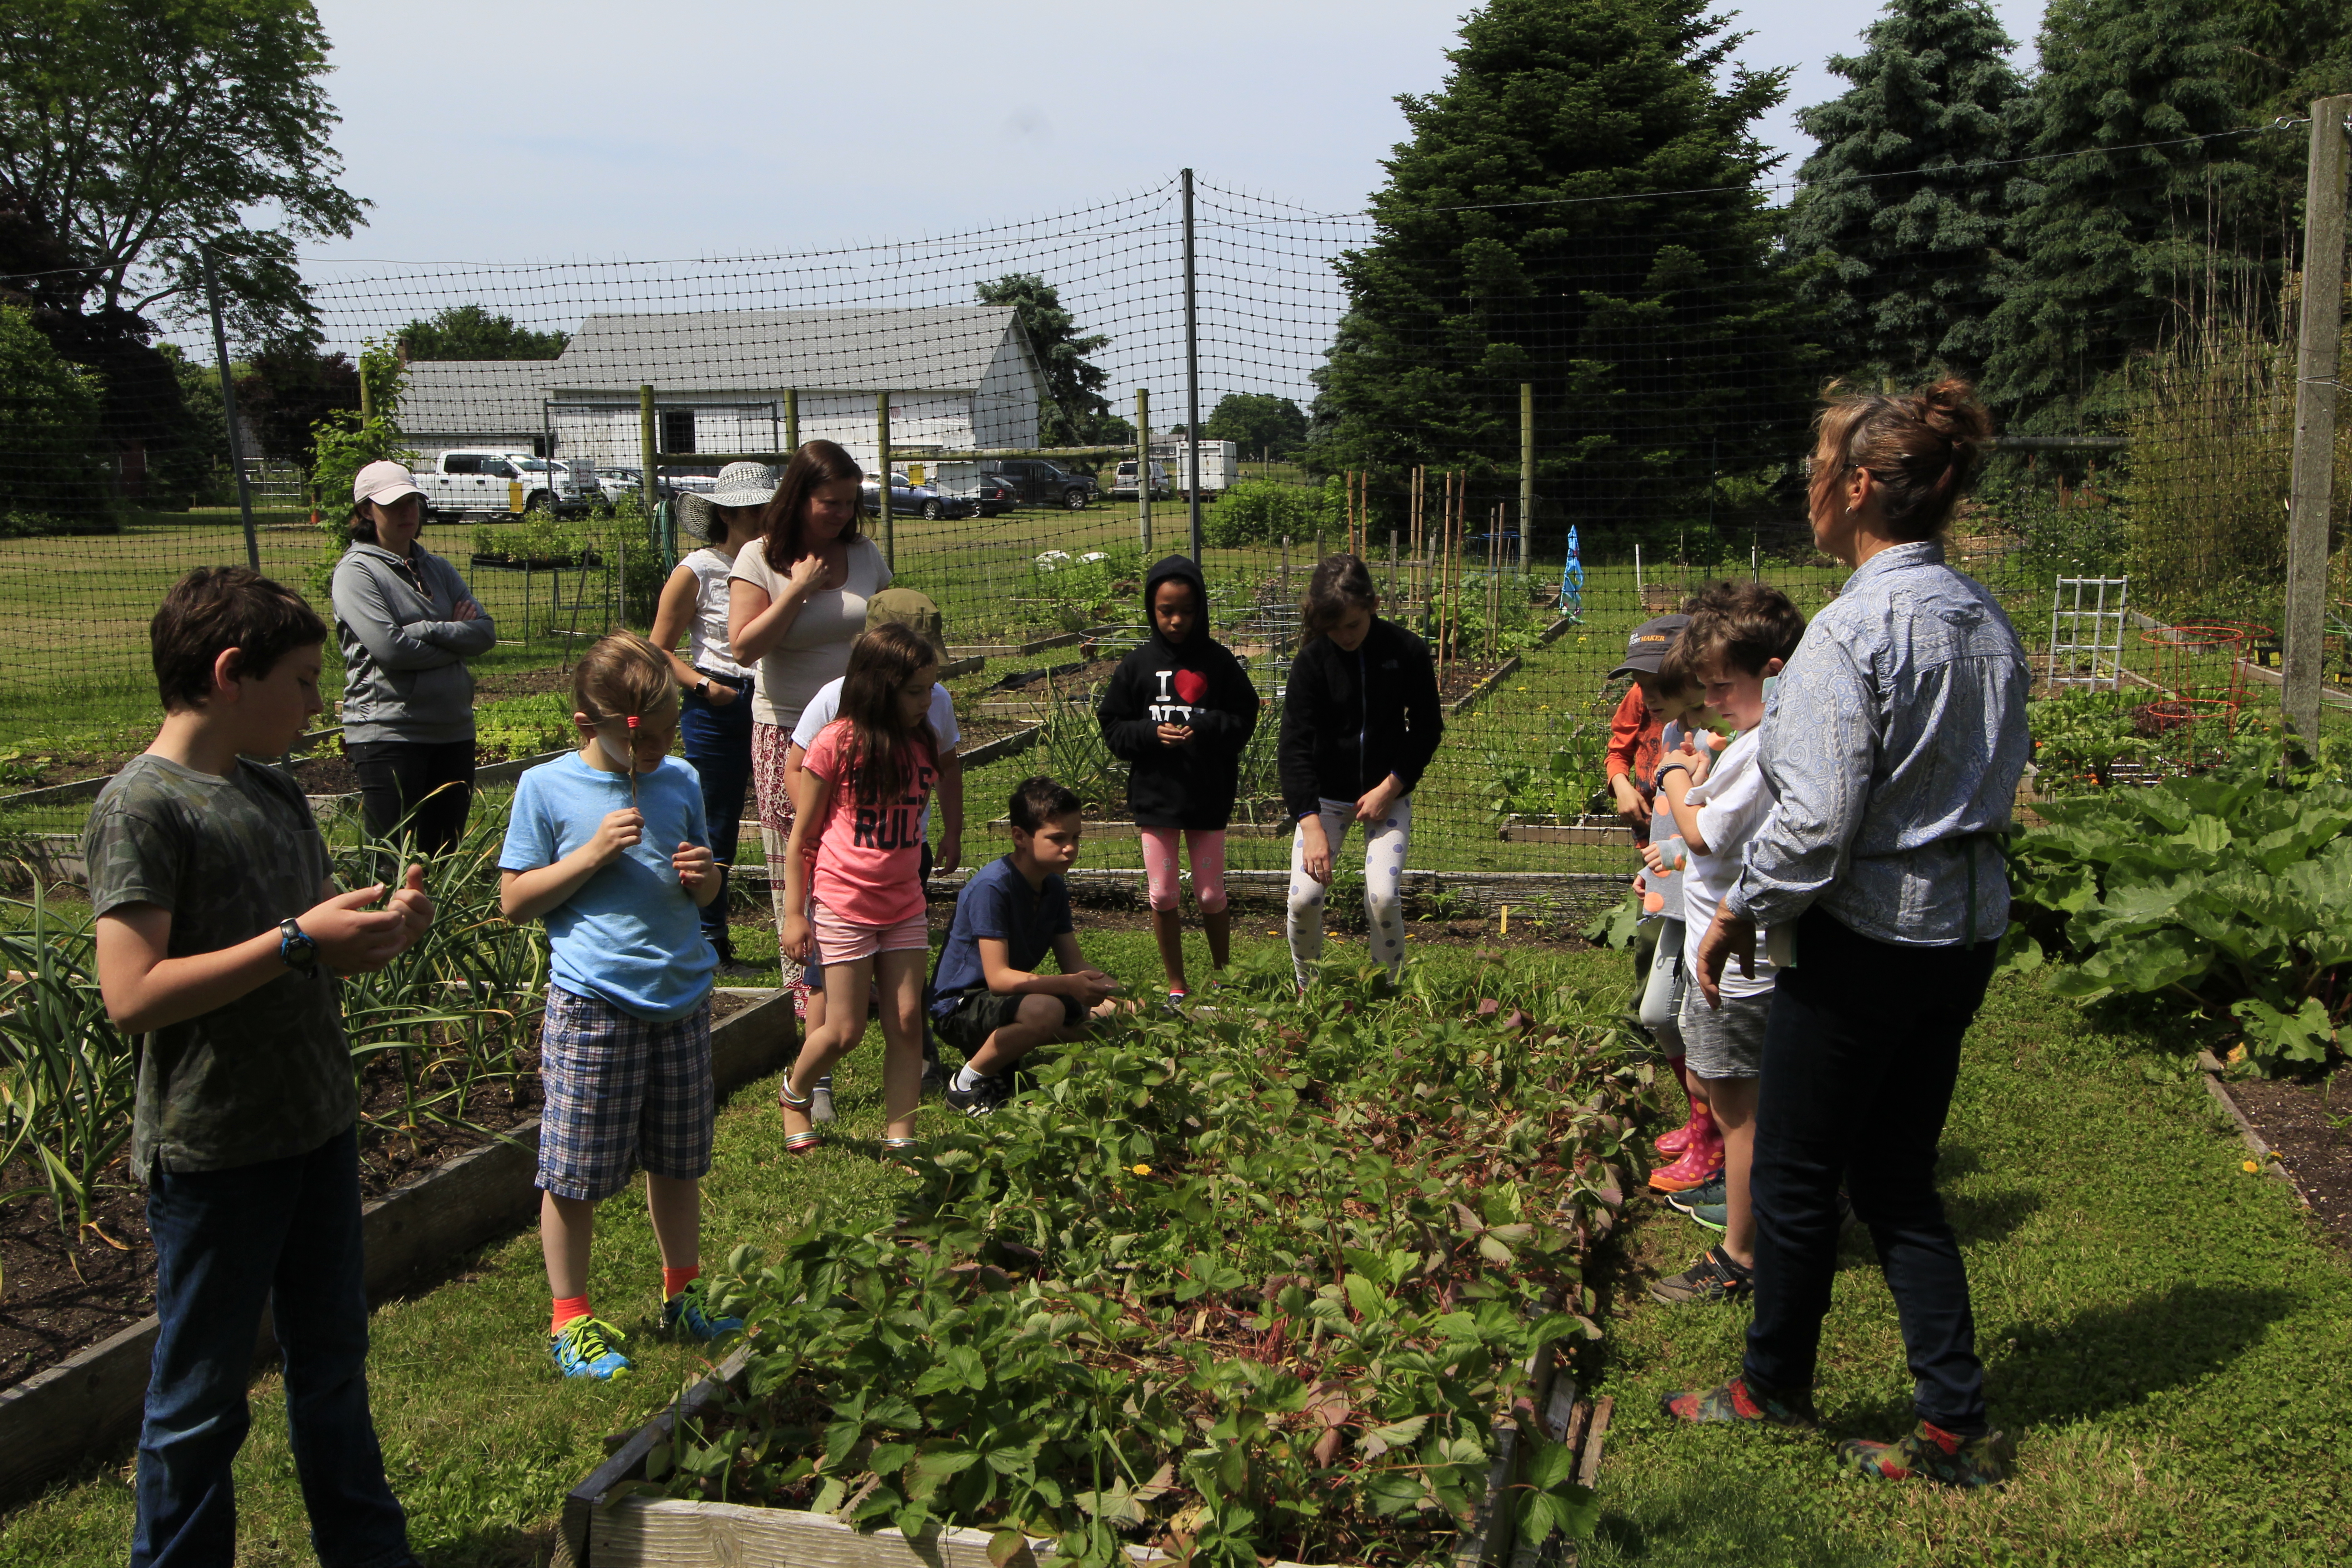 Students at the community garden at the Ag Center